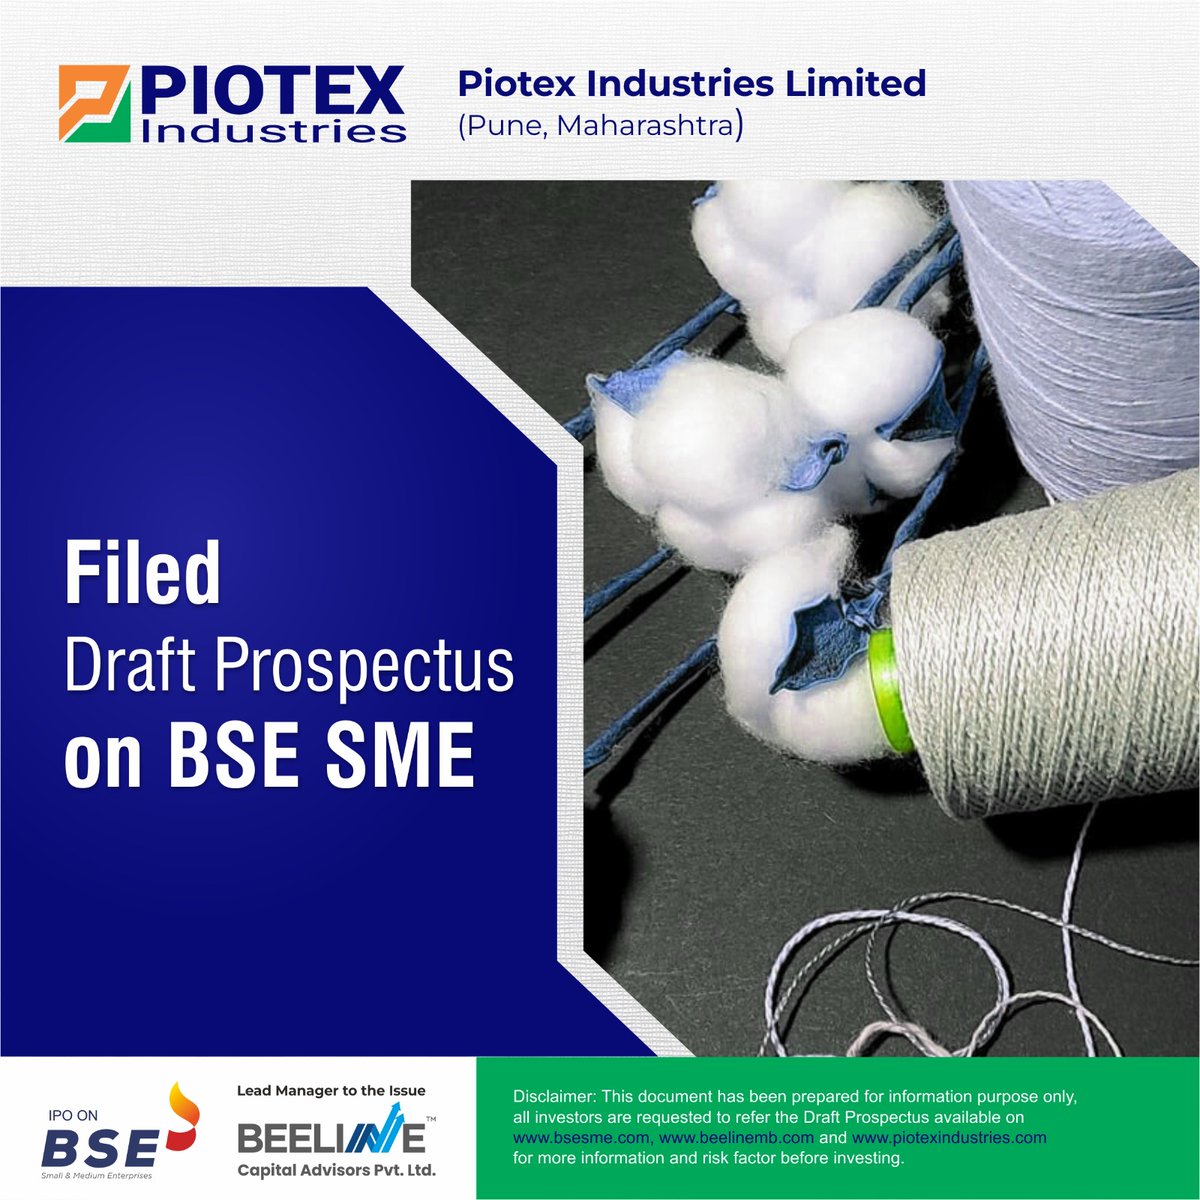 Filed Draft Prospectus of Piotex Industries Limited (Pune, Maharashtra) on BSE SME 
Company is engaged in the business of manufacturing and trading of yarn, fabric and cotton bales. 
piotexindustries. com
#capitalmarkets #beelinecapitaladvisors #piotex #SME